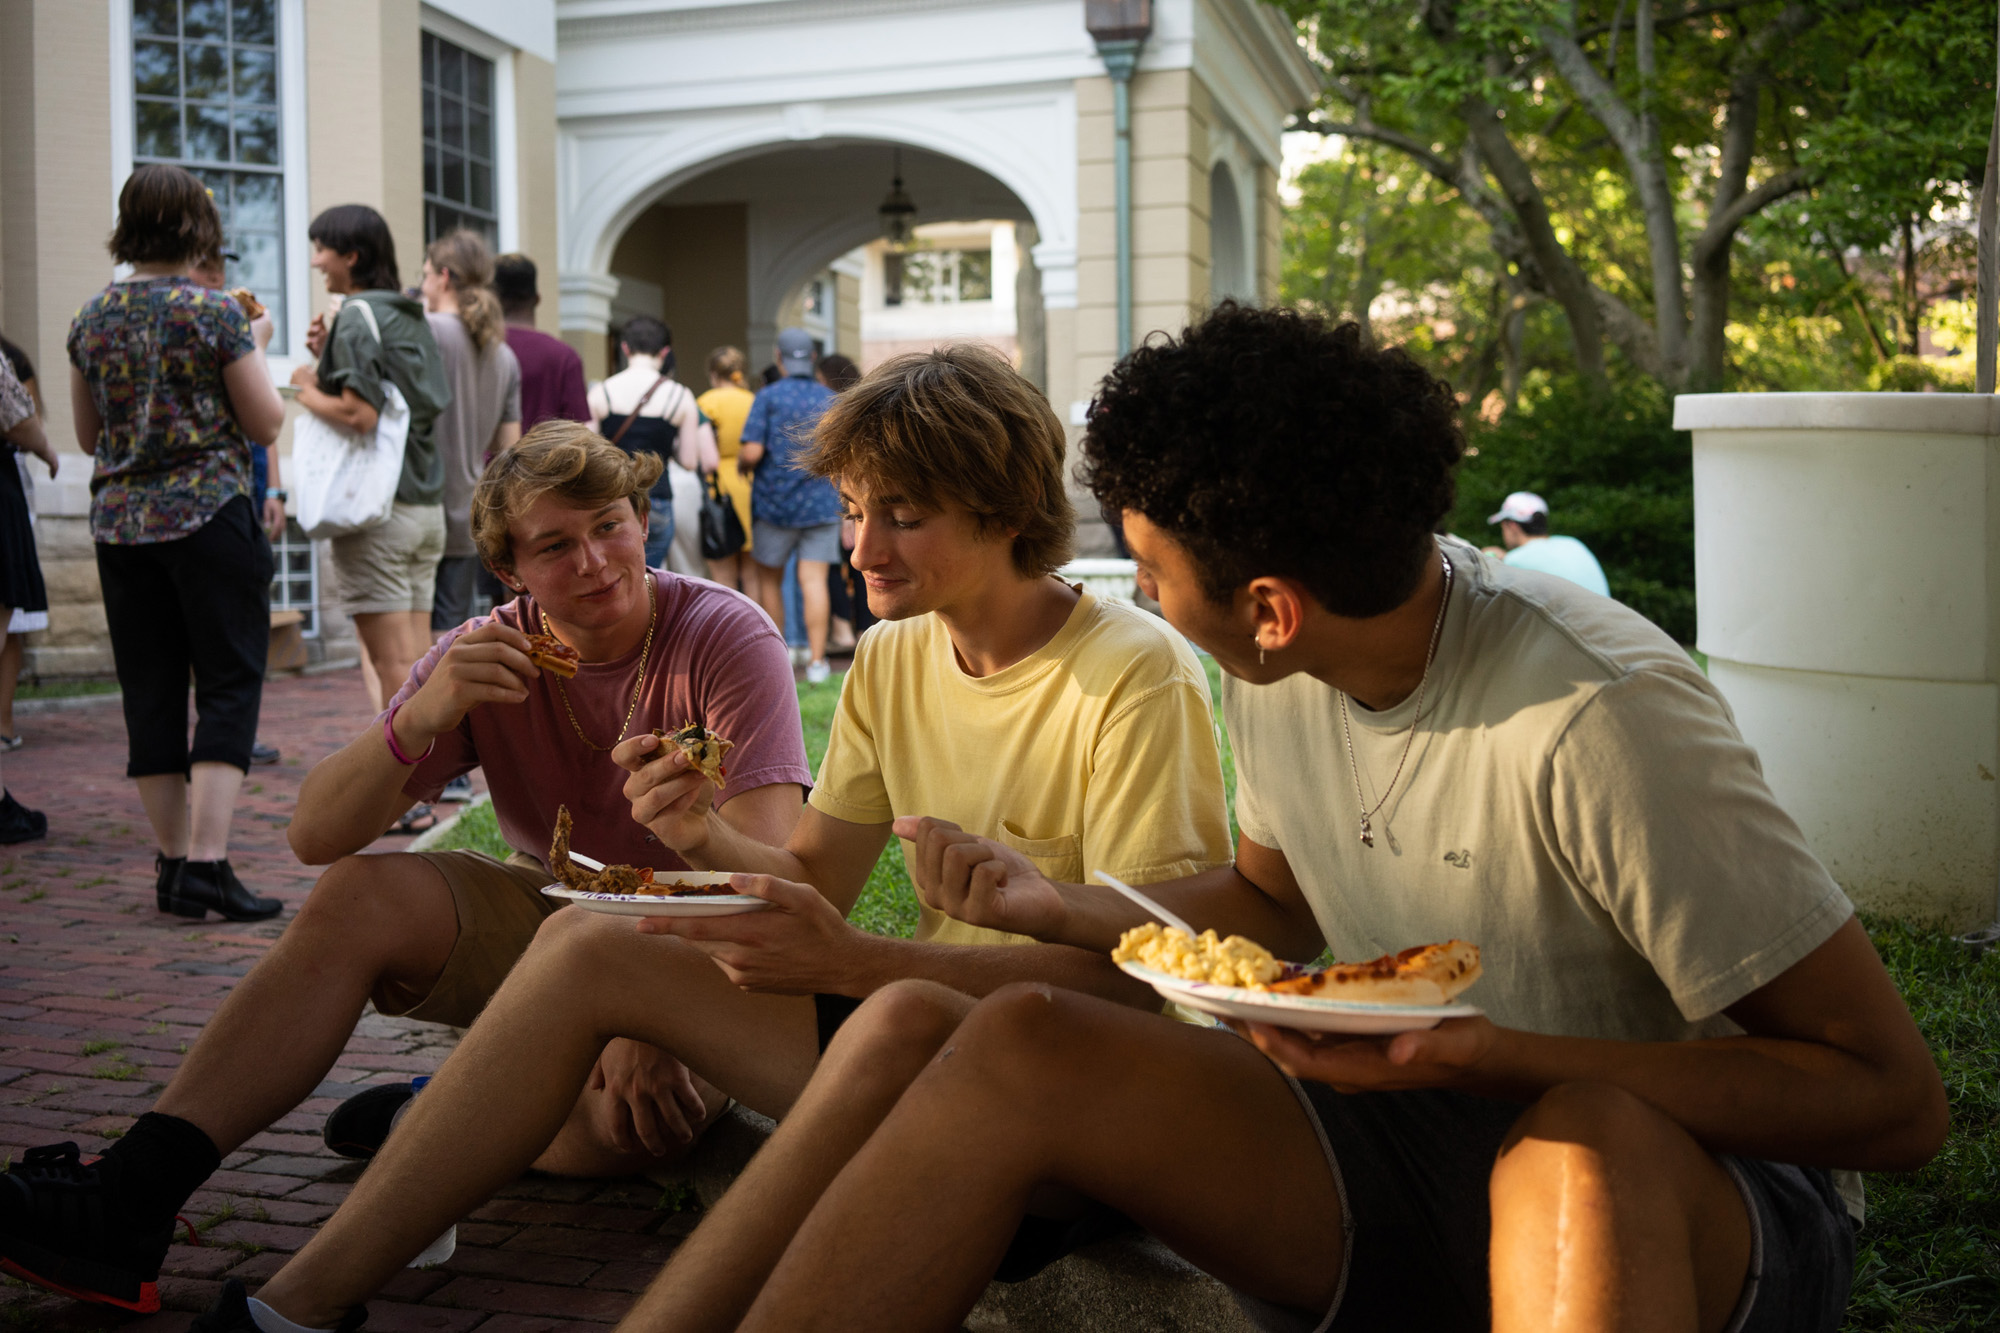 Students sit and enjoy a meal during an outdoor gathering for Honors Tutorial College